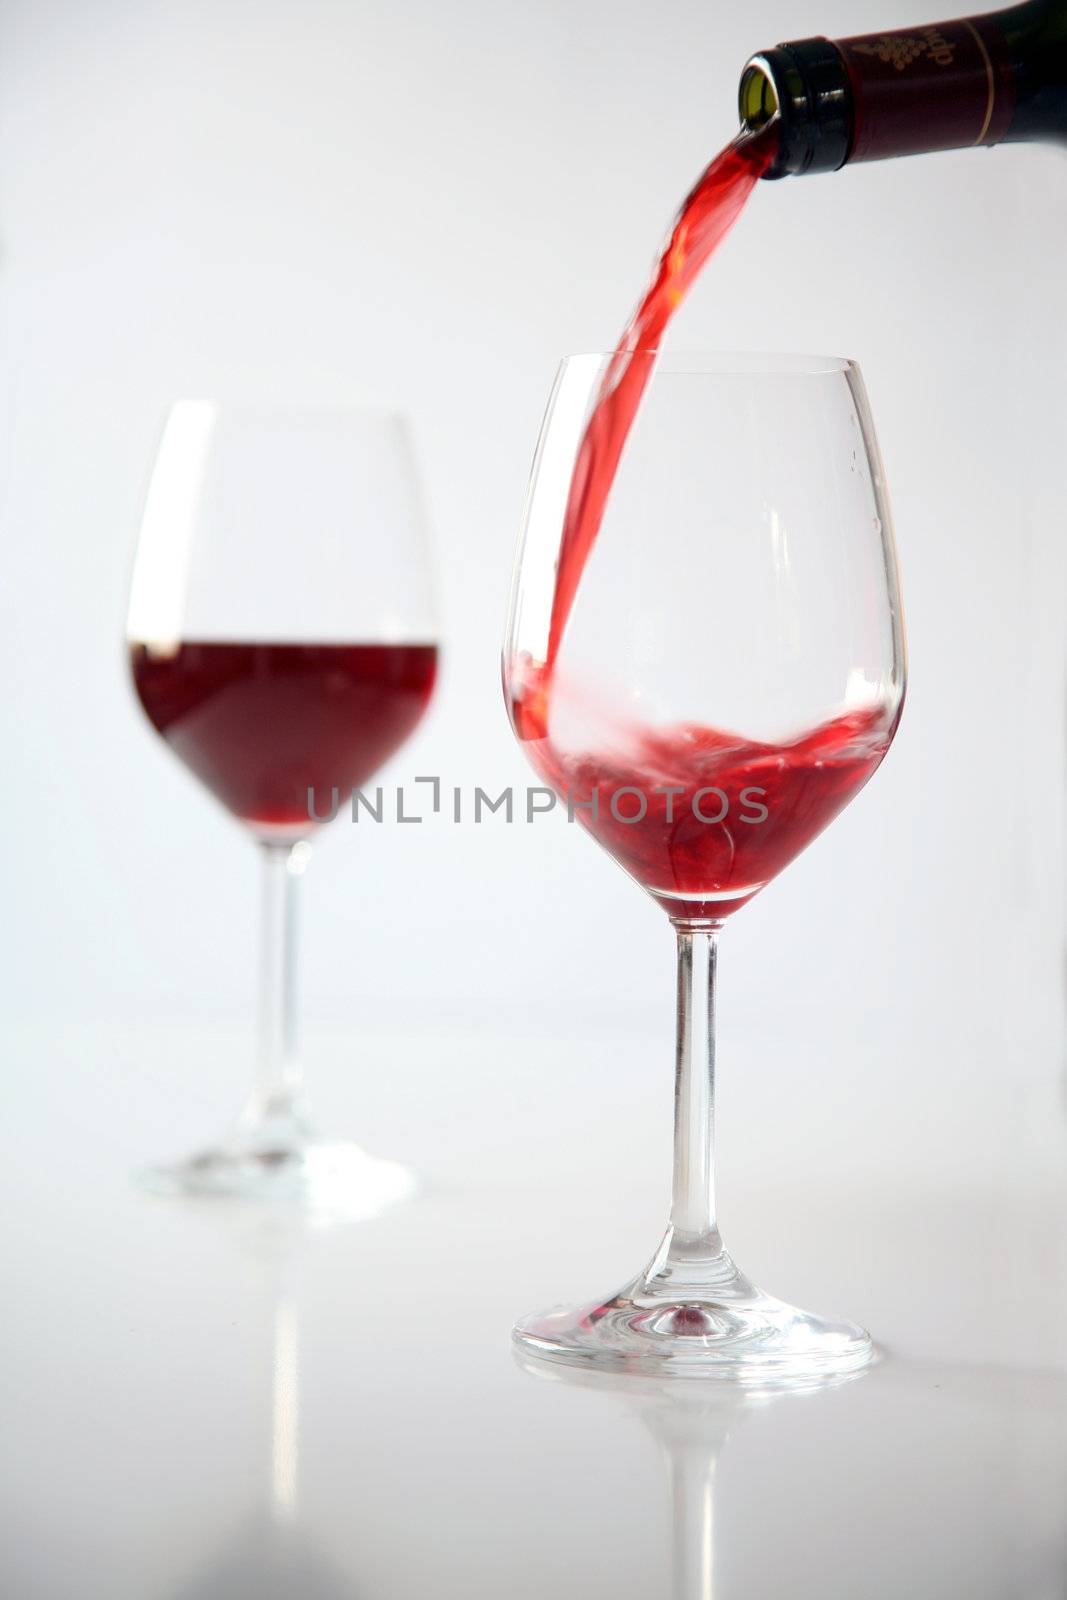 Two glasses of red wine and bottle
